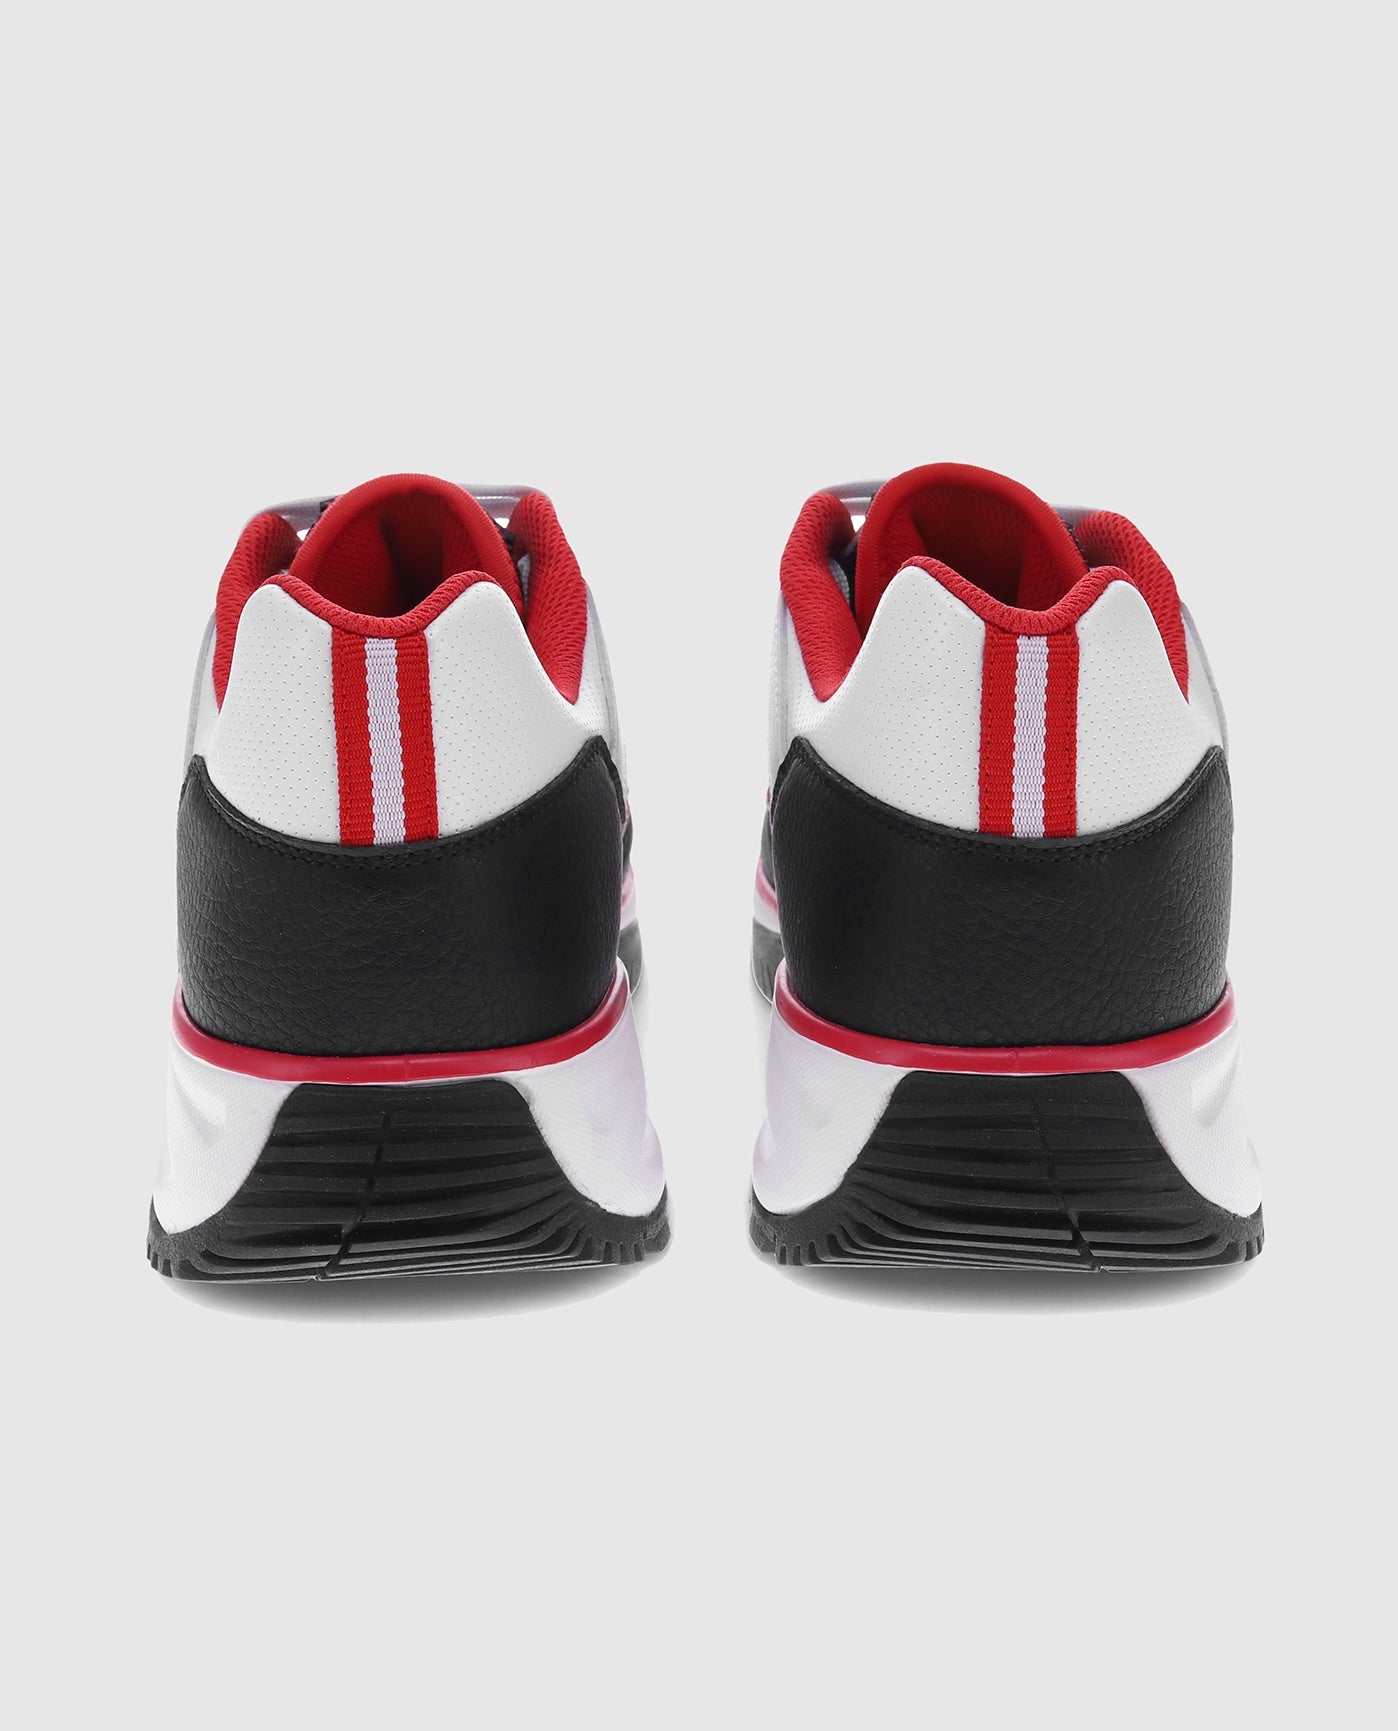 Back Of Starter Team Trainer 92 Low Red Sneaker Pair | Red